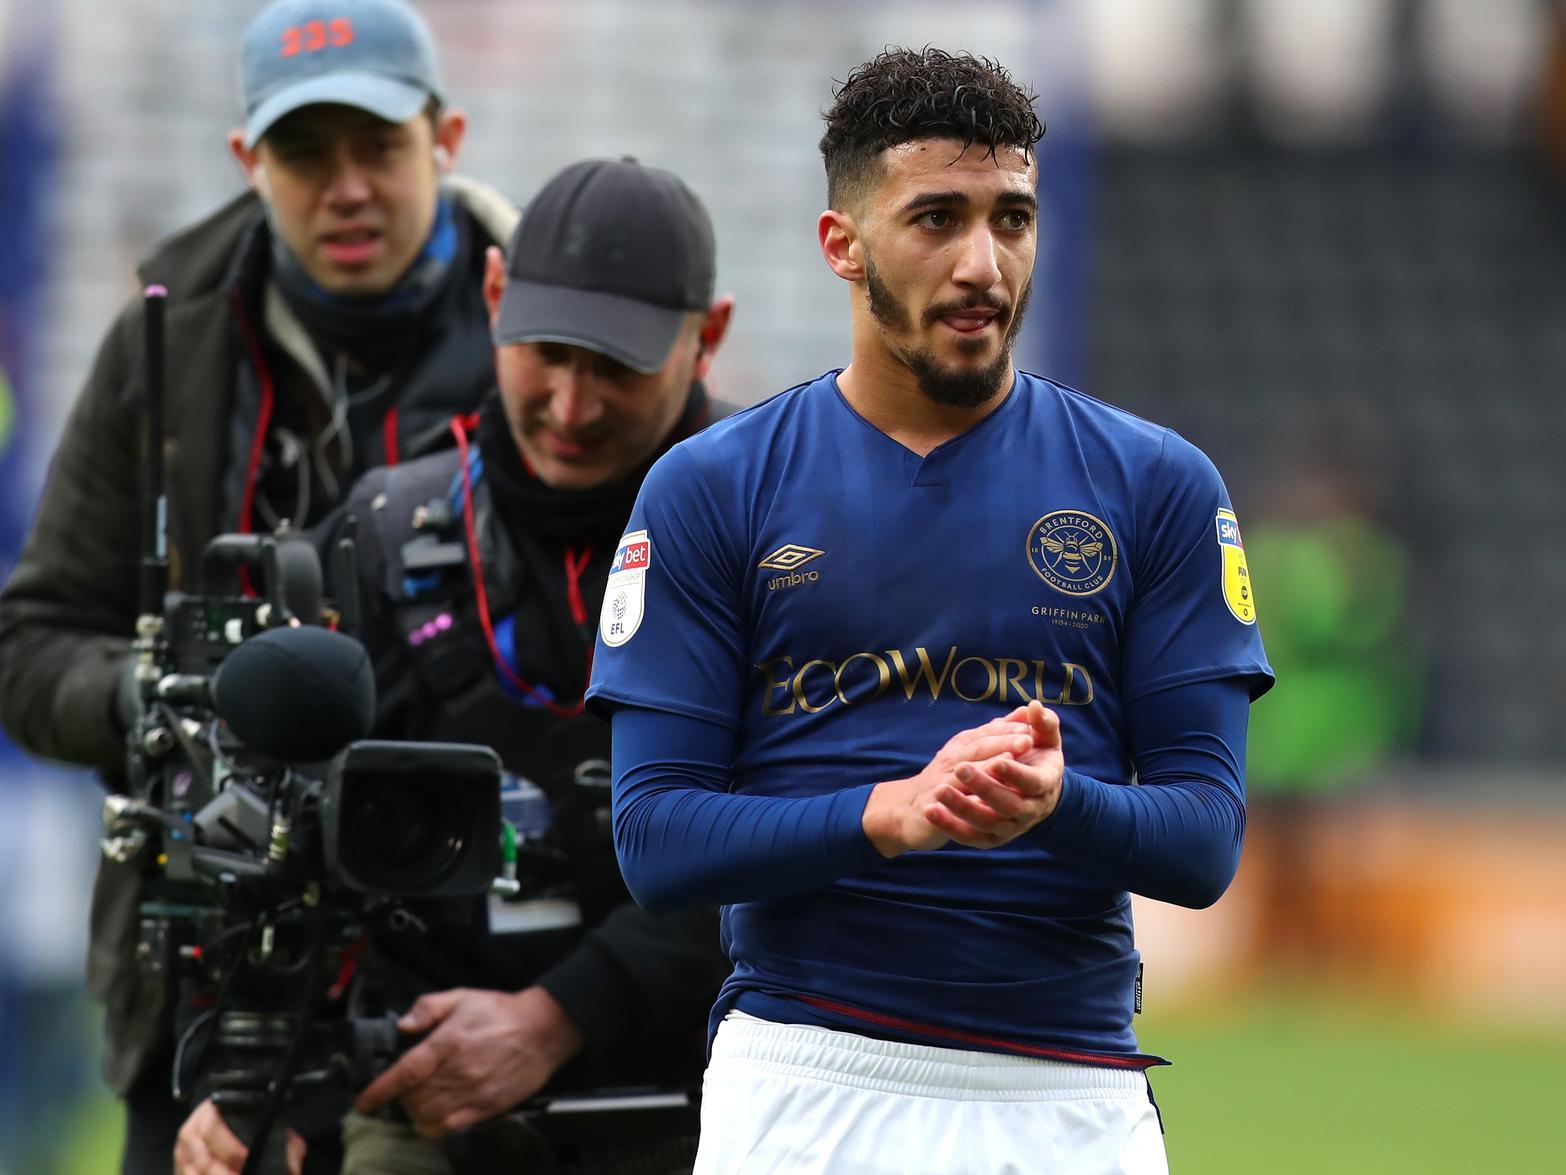 Newcastle United-linked forward Said Benrahma has hinted that he could leave Brentford in the pursuit of Premier League football in the summer, if the Bees don't get promoted this season. (BBC Sport)